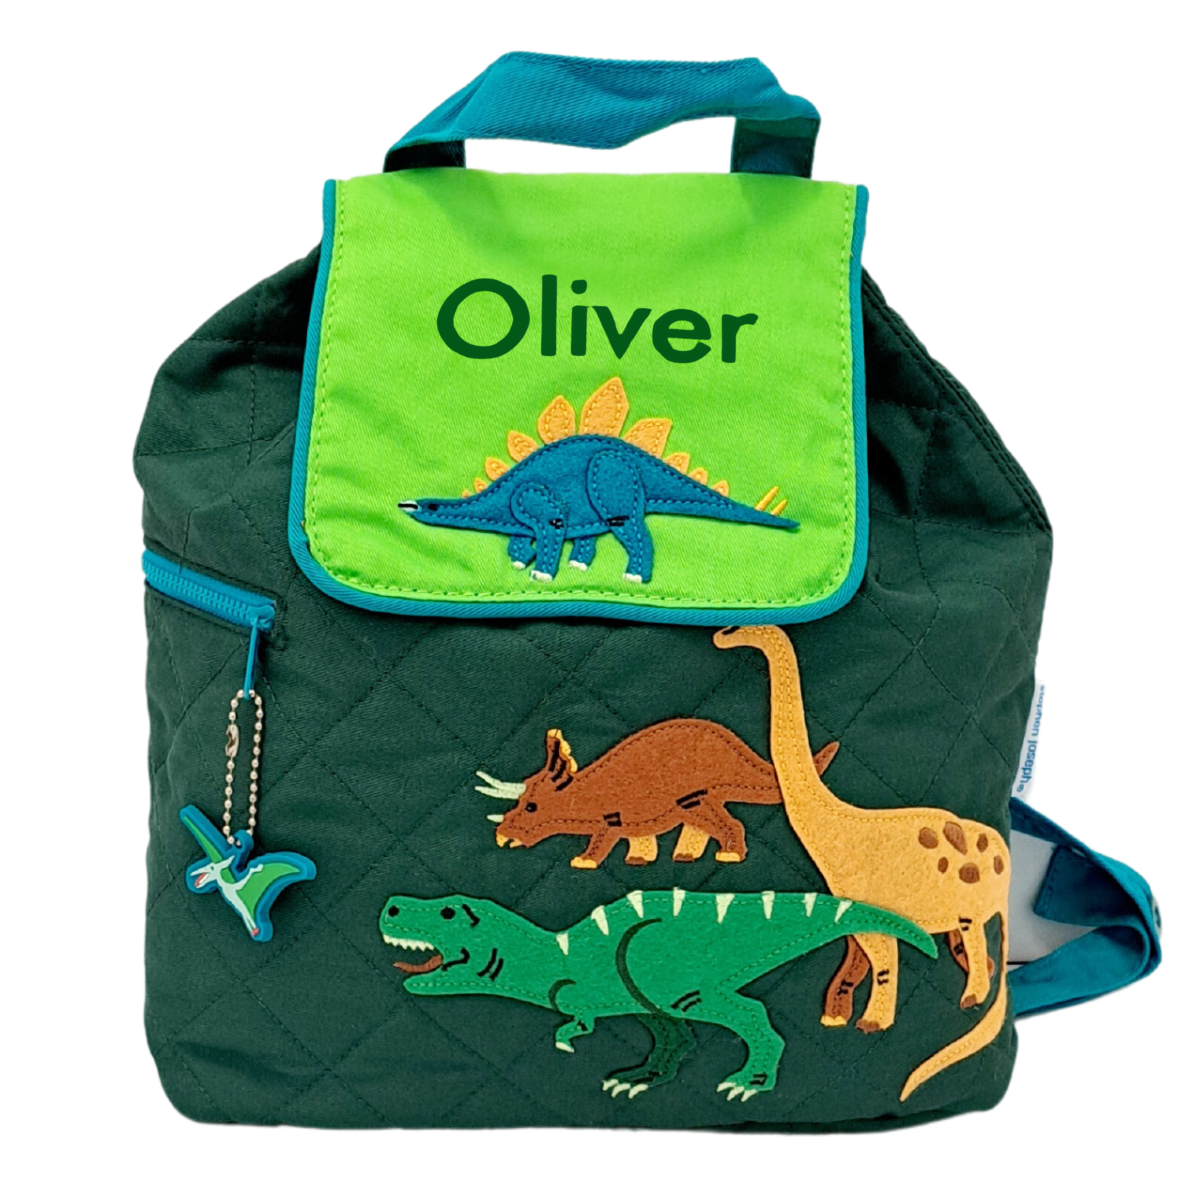 Dinosaur Backpack With Spikes | Dinosaur Universe